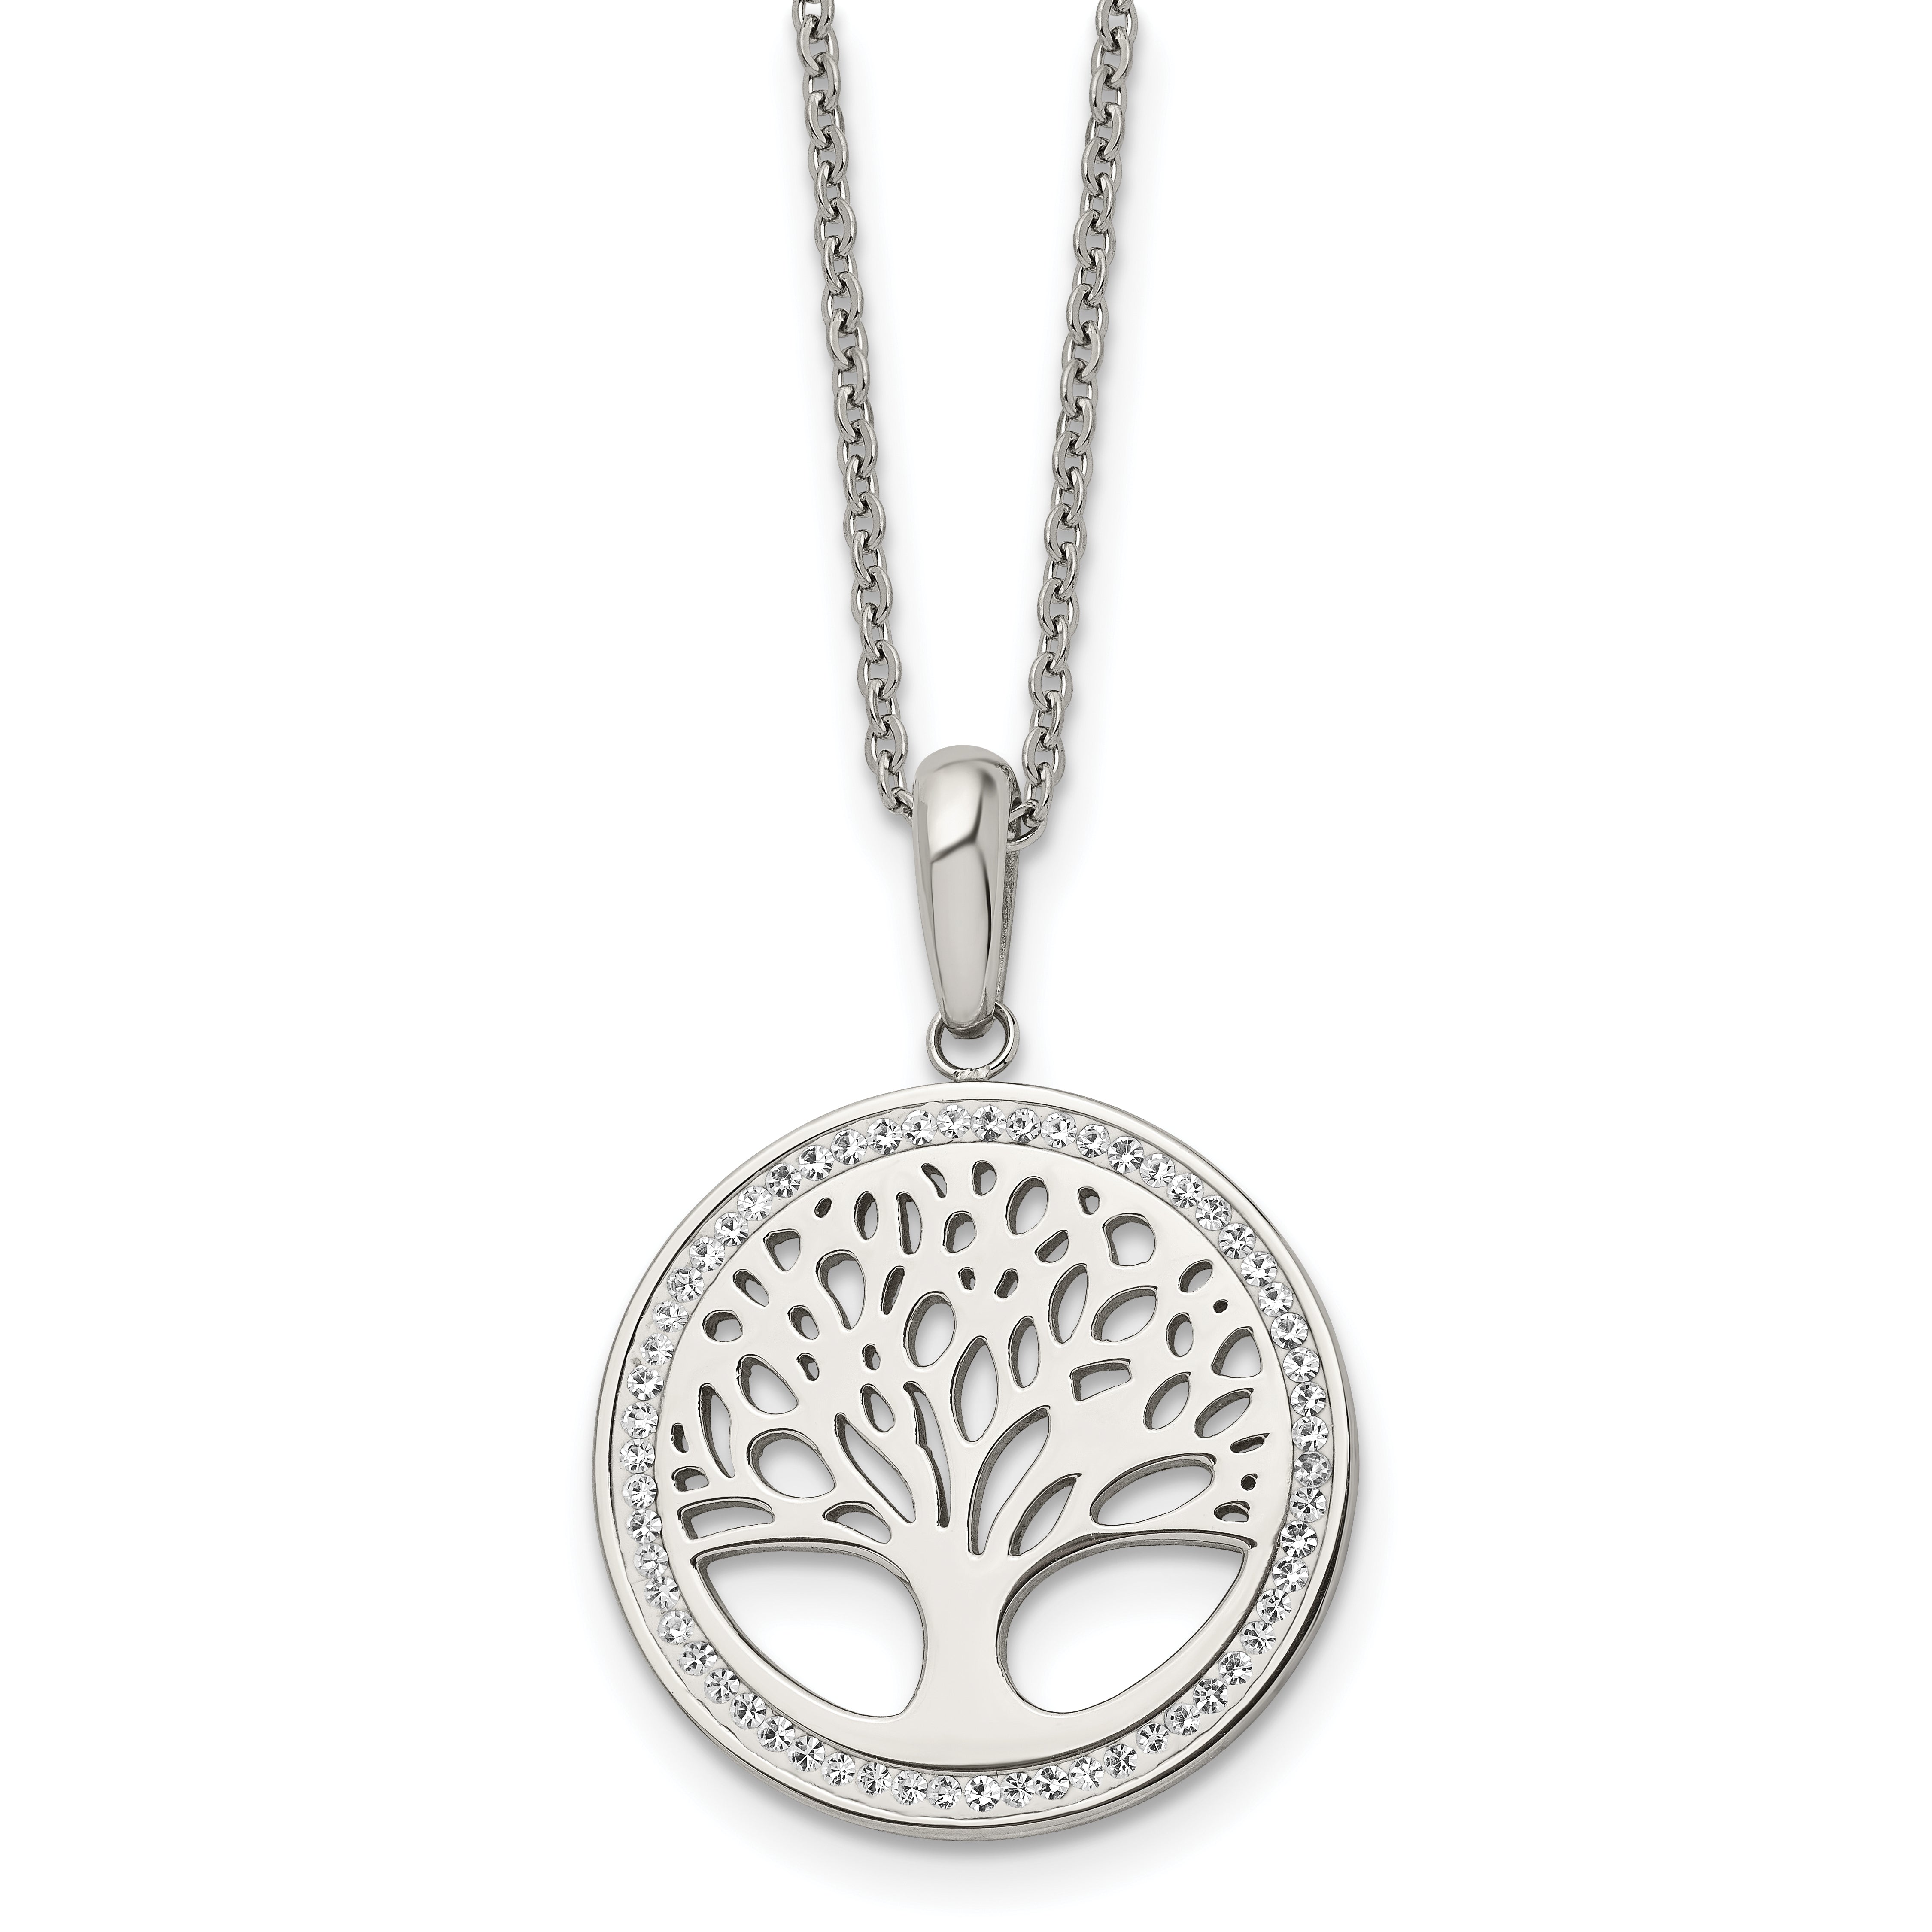 Chisel Stainless Steel Polished with Preciosa Crystal Tree of Life Pendant on a 16 inch Cable Chain with 2 inch Extension Necklace